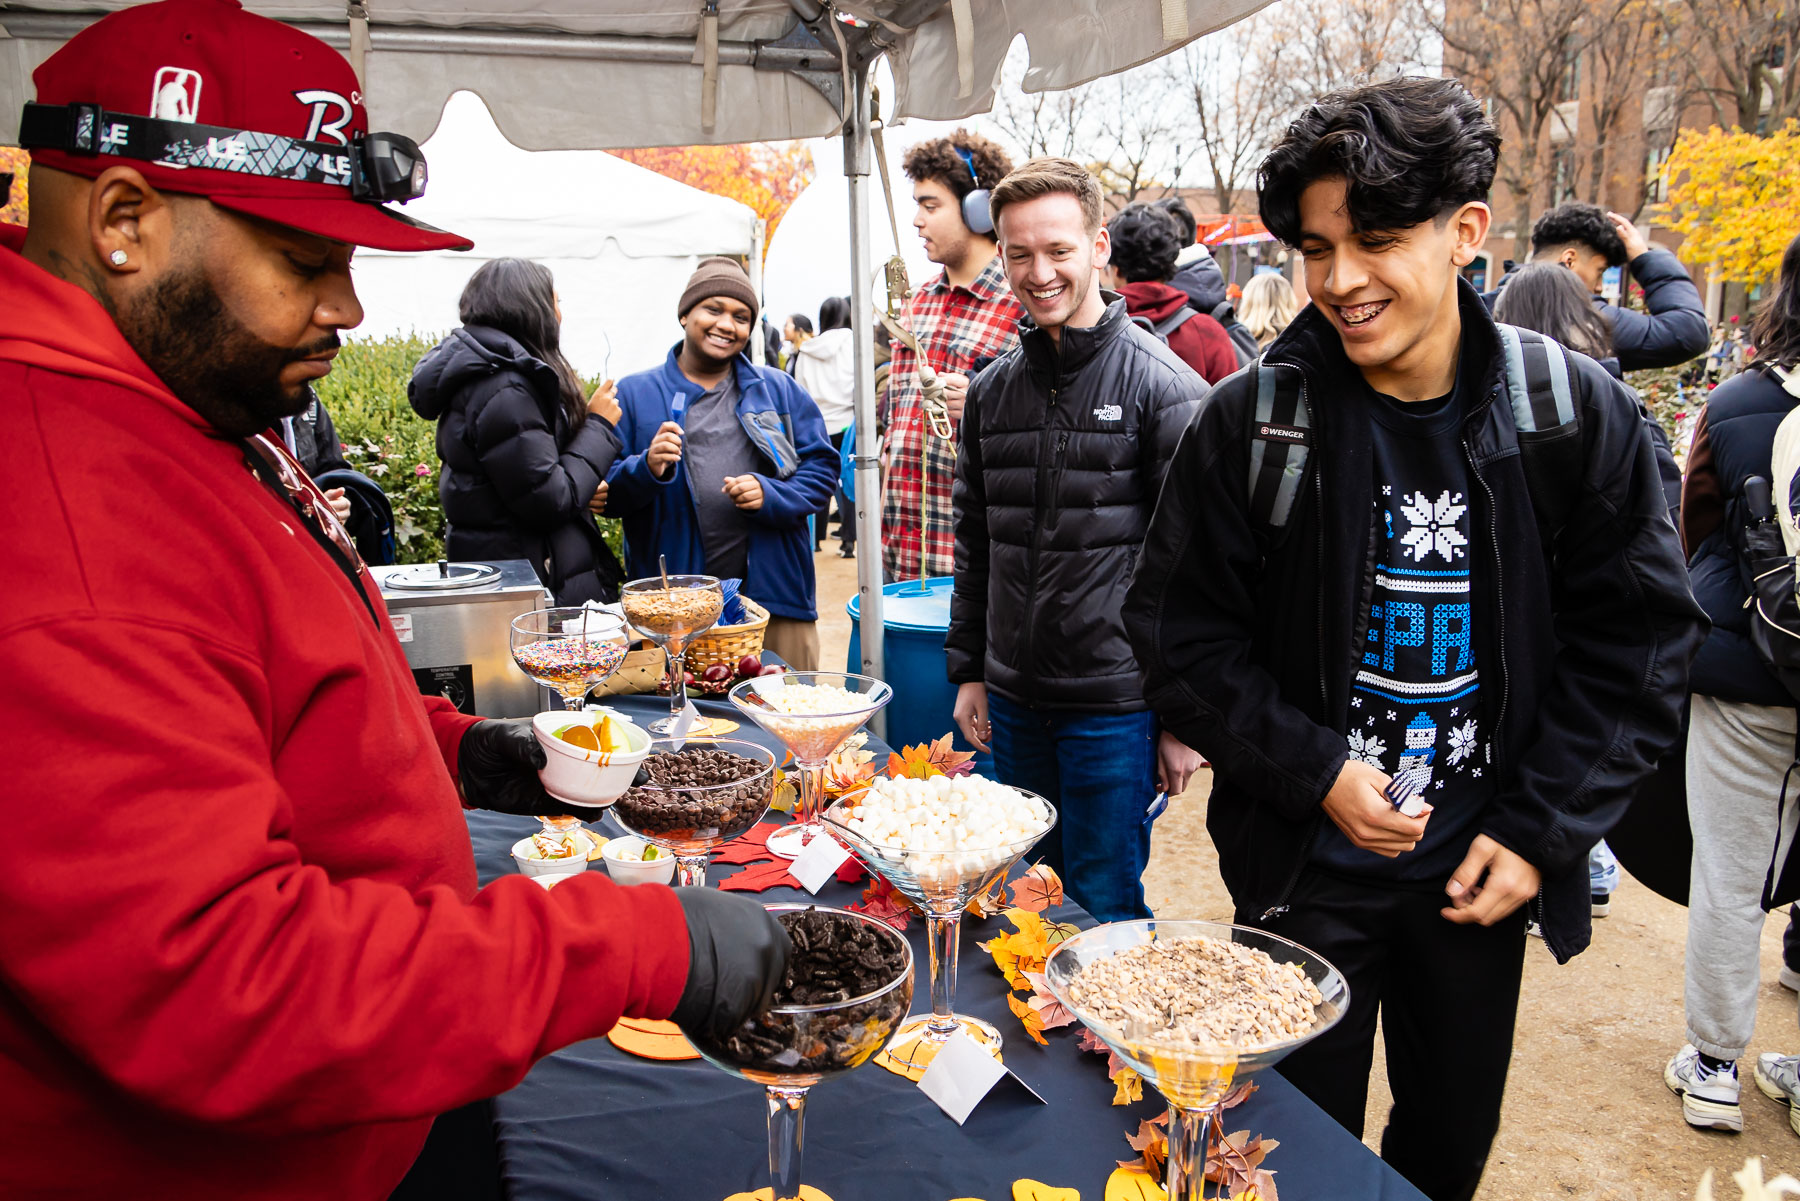 With sweaters in-hand, students were treated to all sorts of delctibles during the party on the Quad. (Photo by Jeff Carrion / DePaul University) 